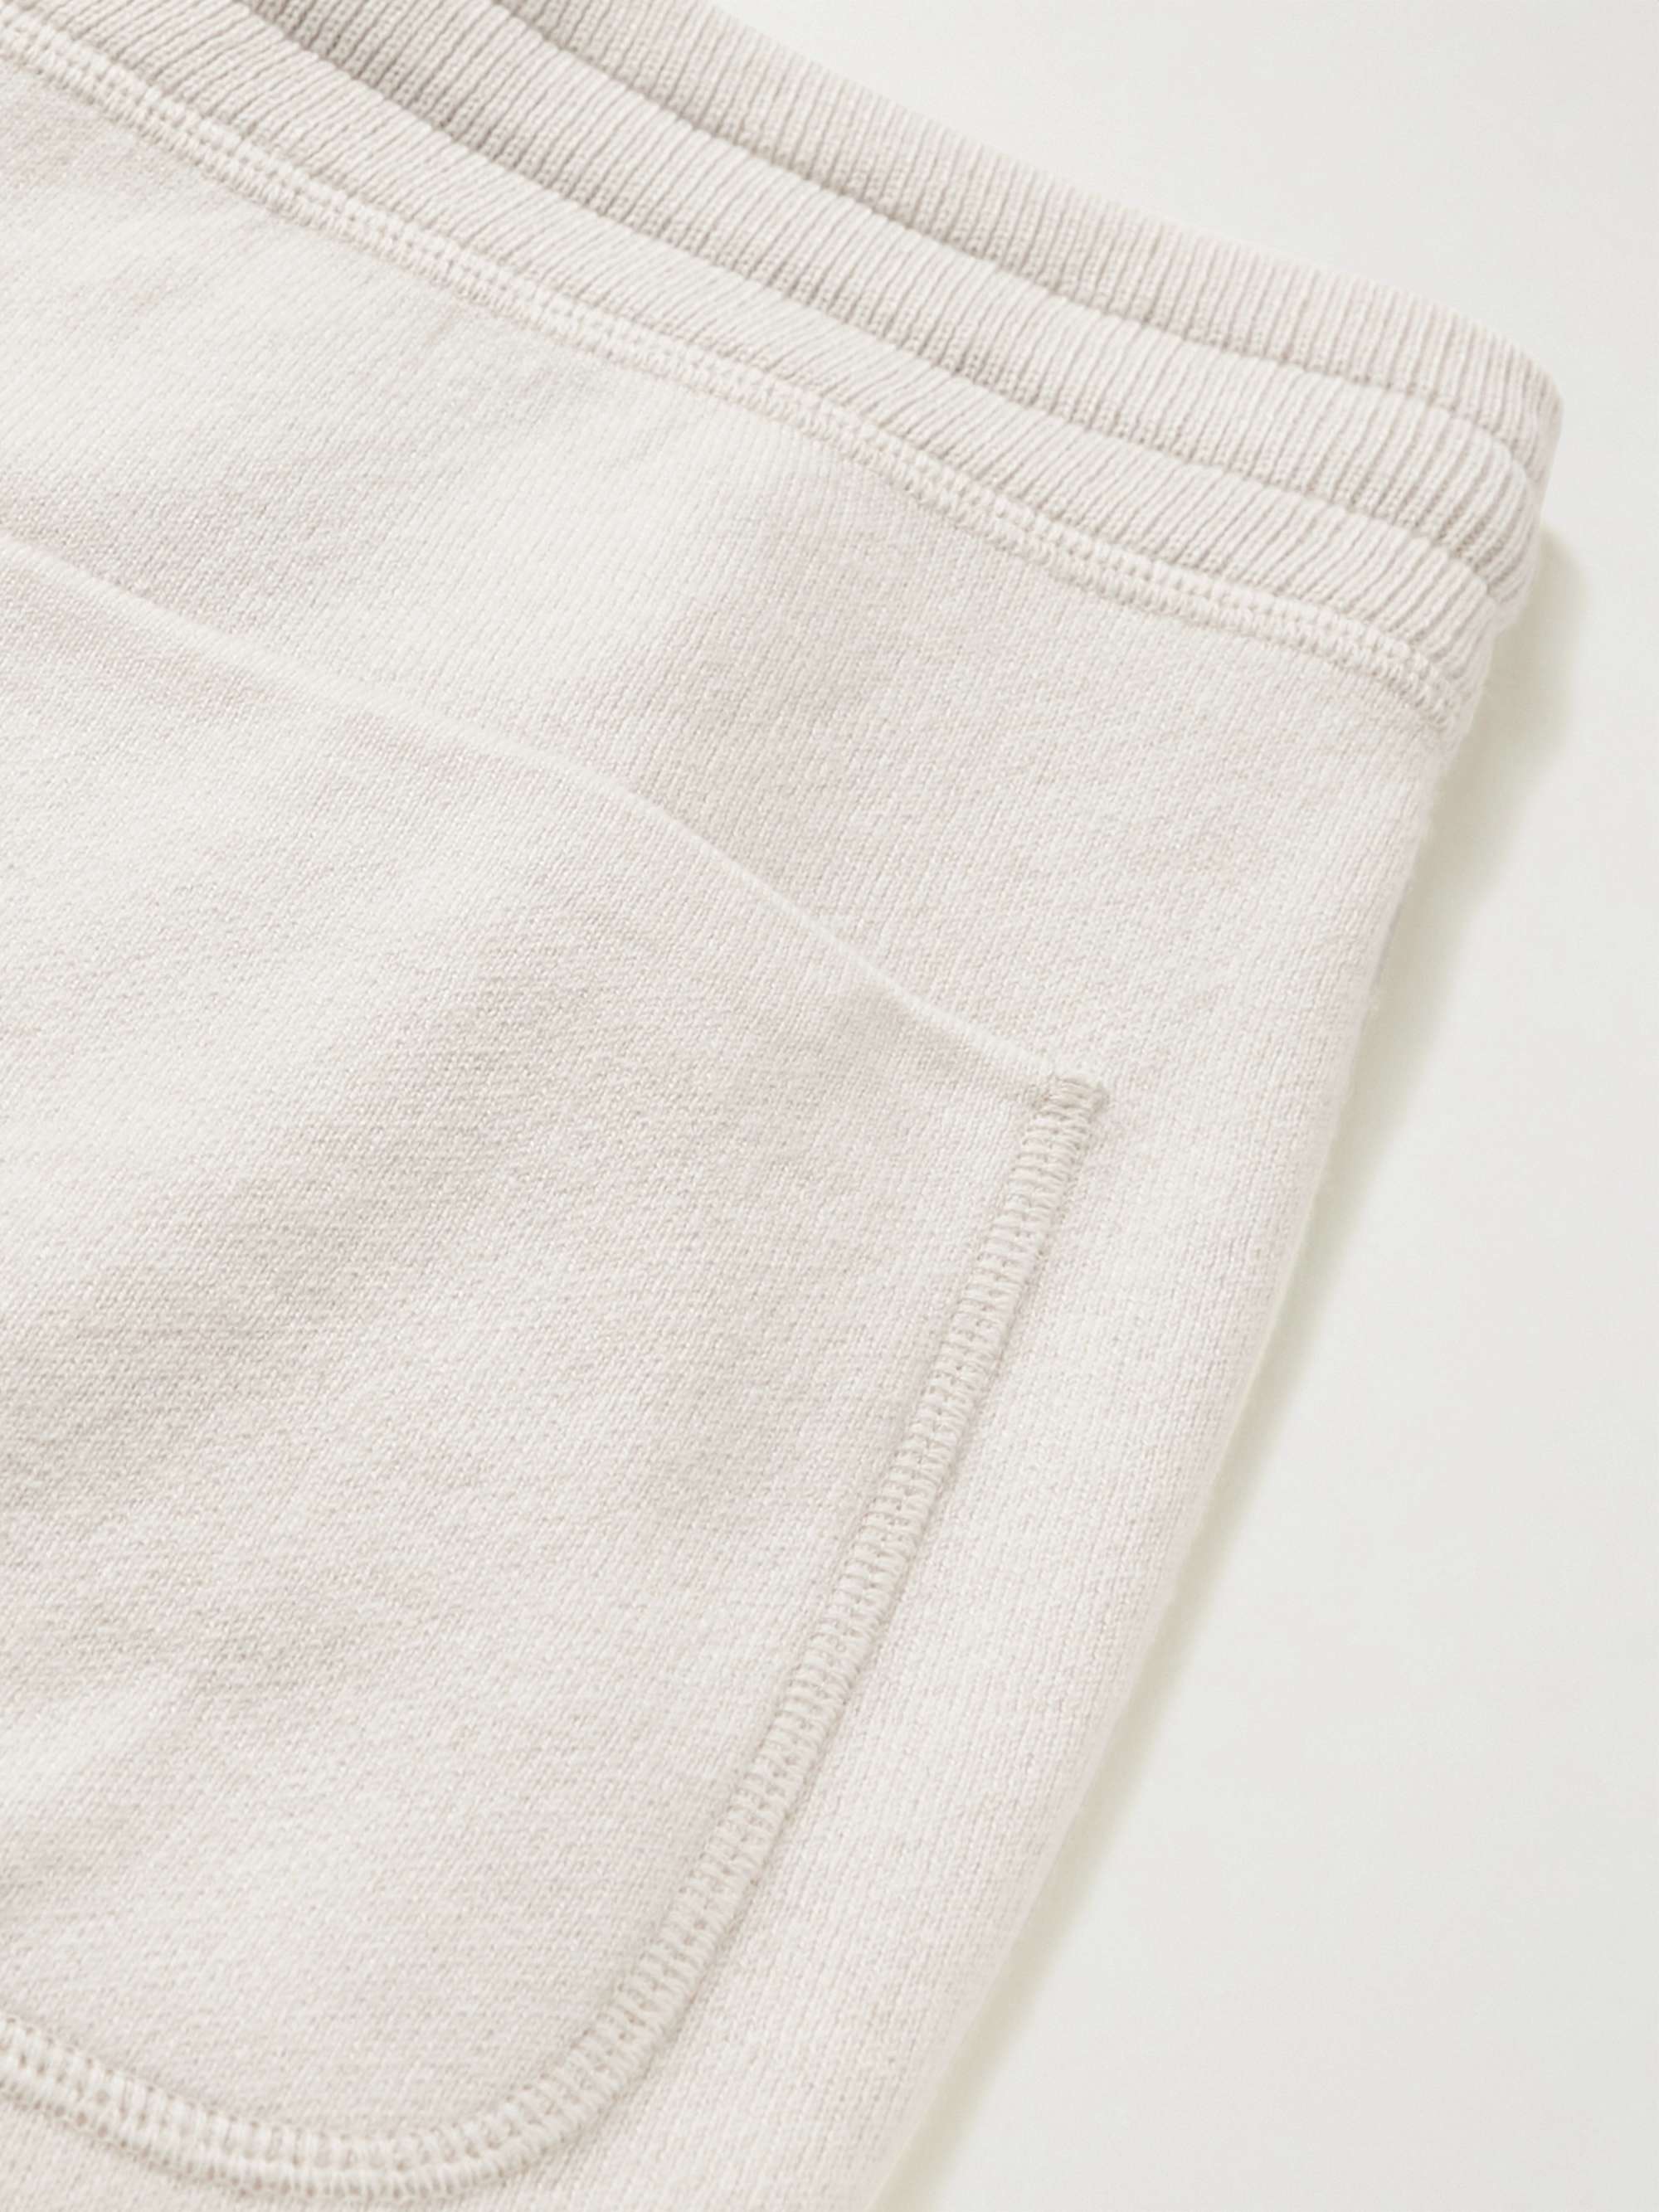 TOM FORD Tapered Cashmere Sweatpants